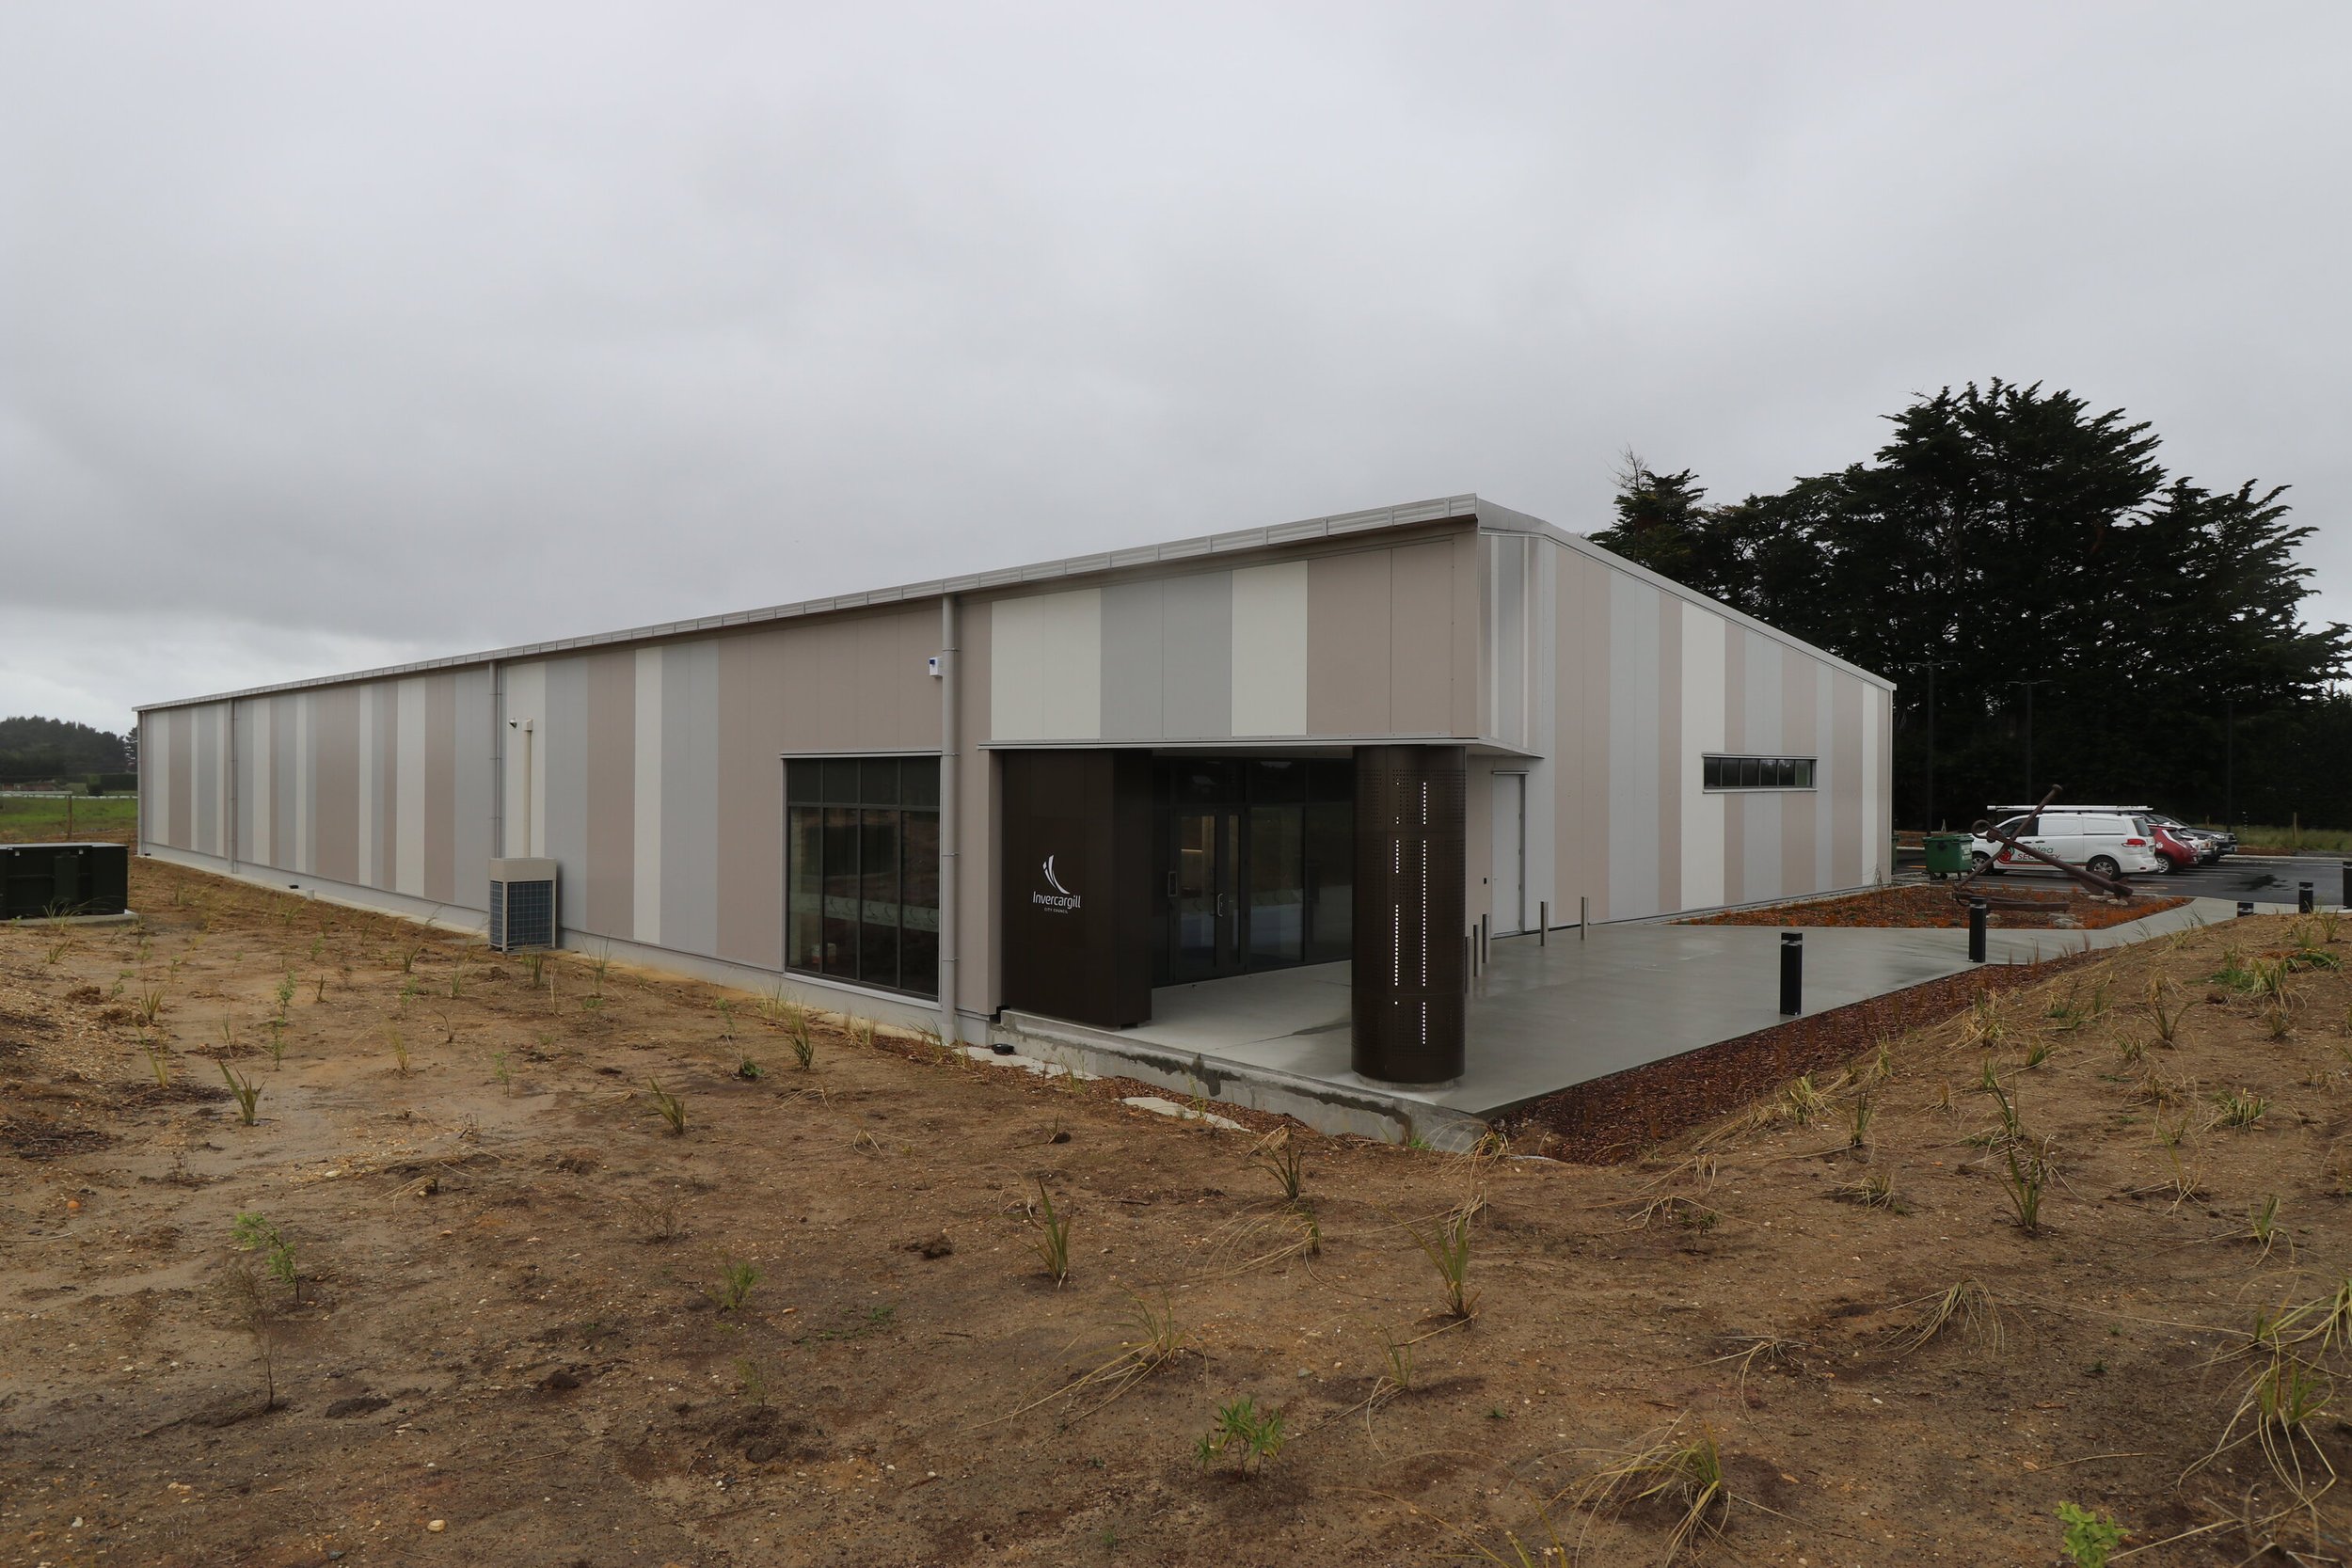  The build of our regional museum collections storage facility at Tisbury was officially completed this month 